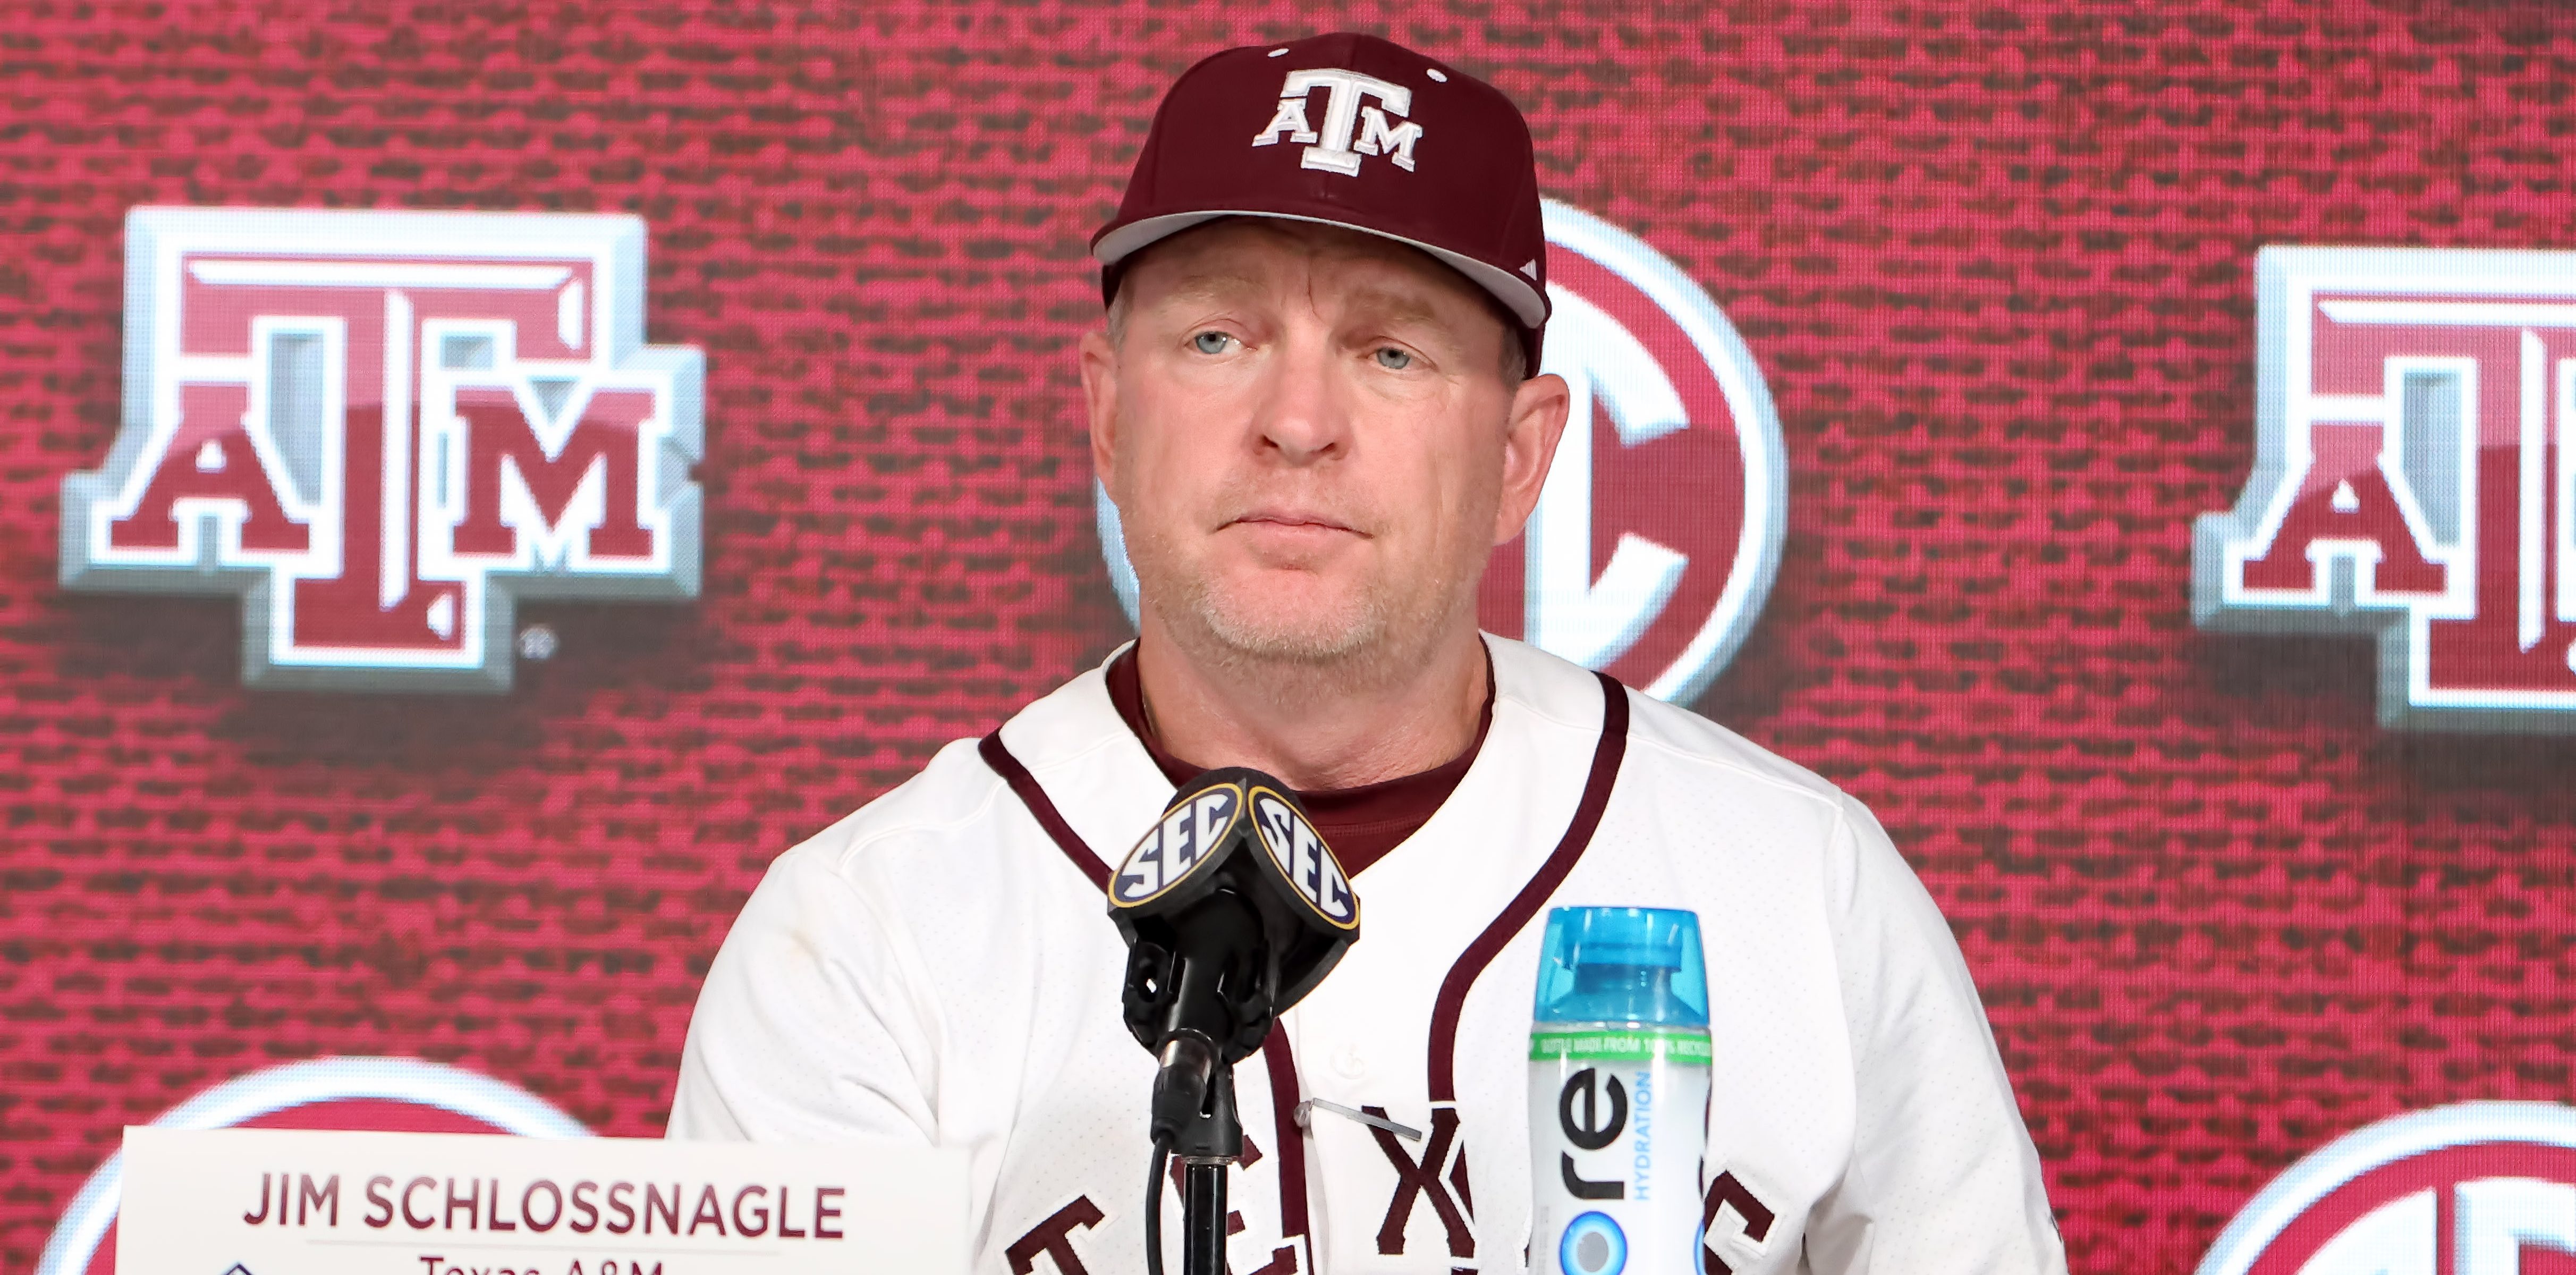 Videos of Georgia pitcher leads Texas A&M coach to suspect cheating